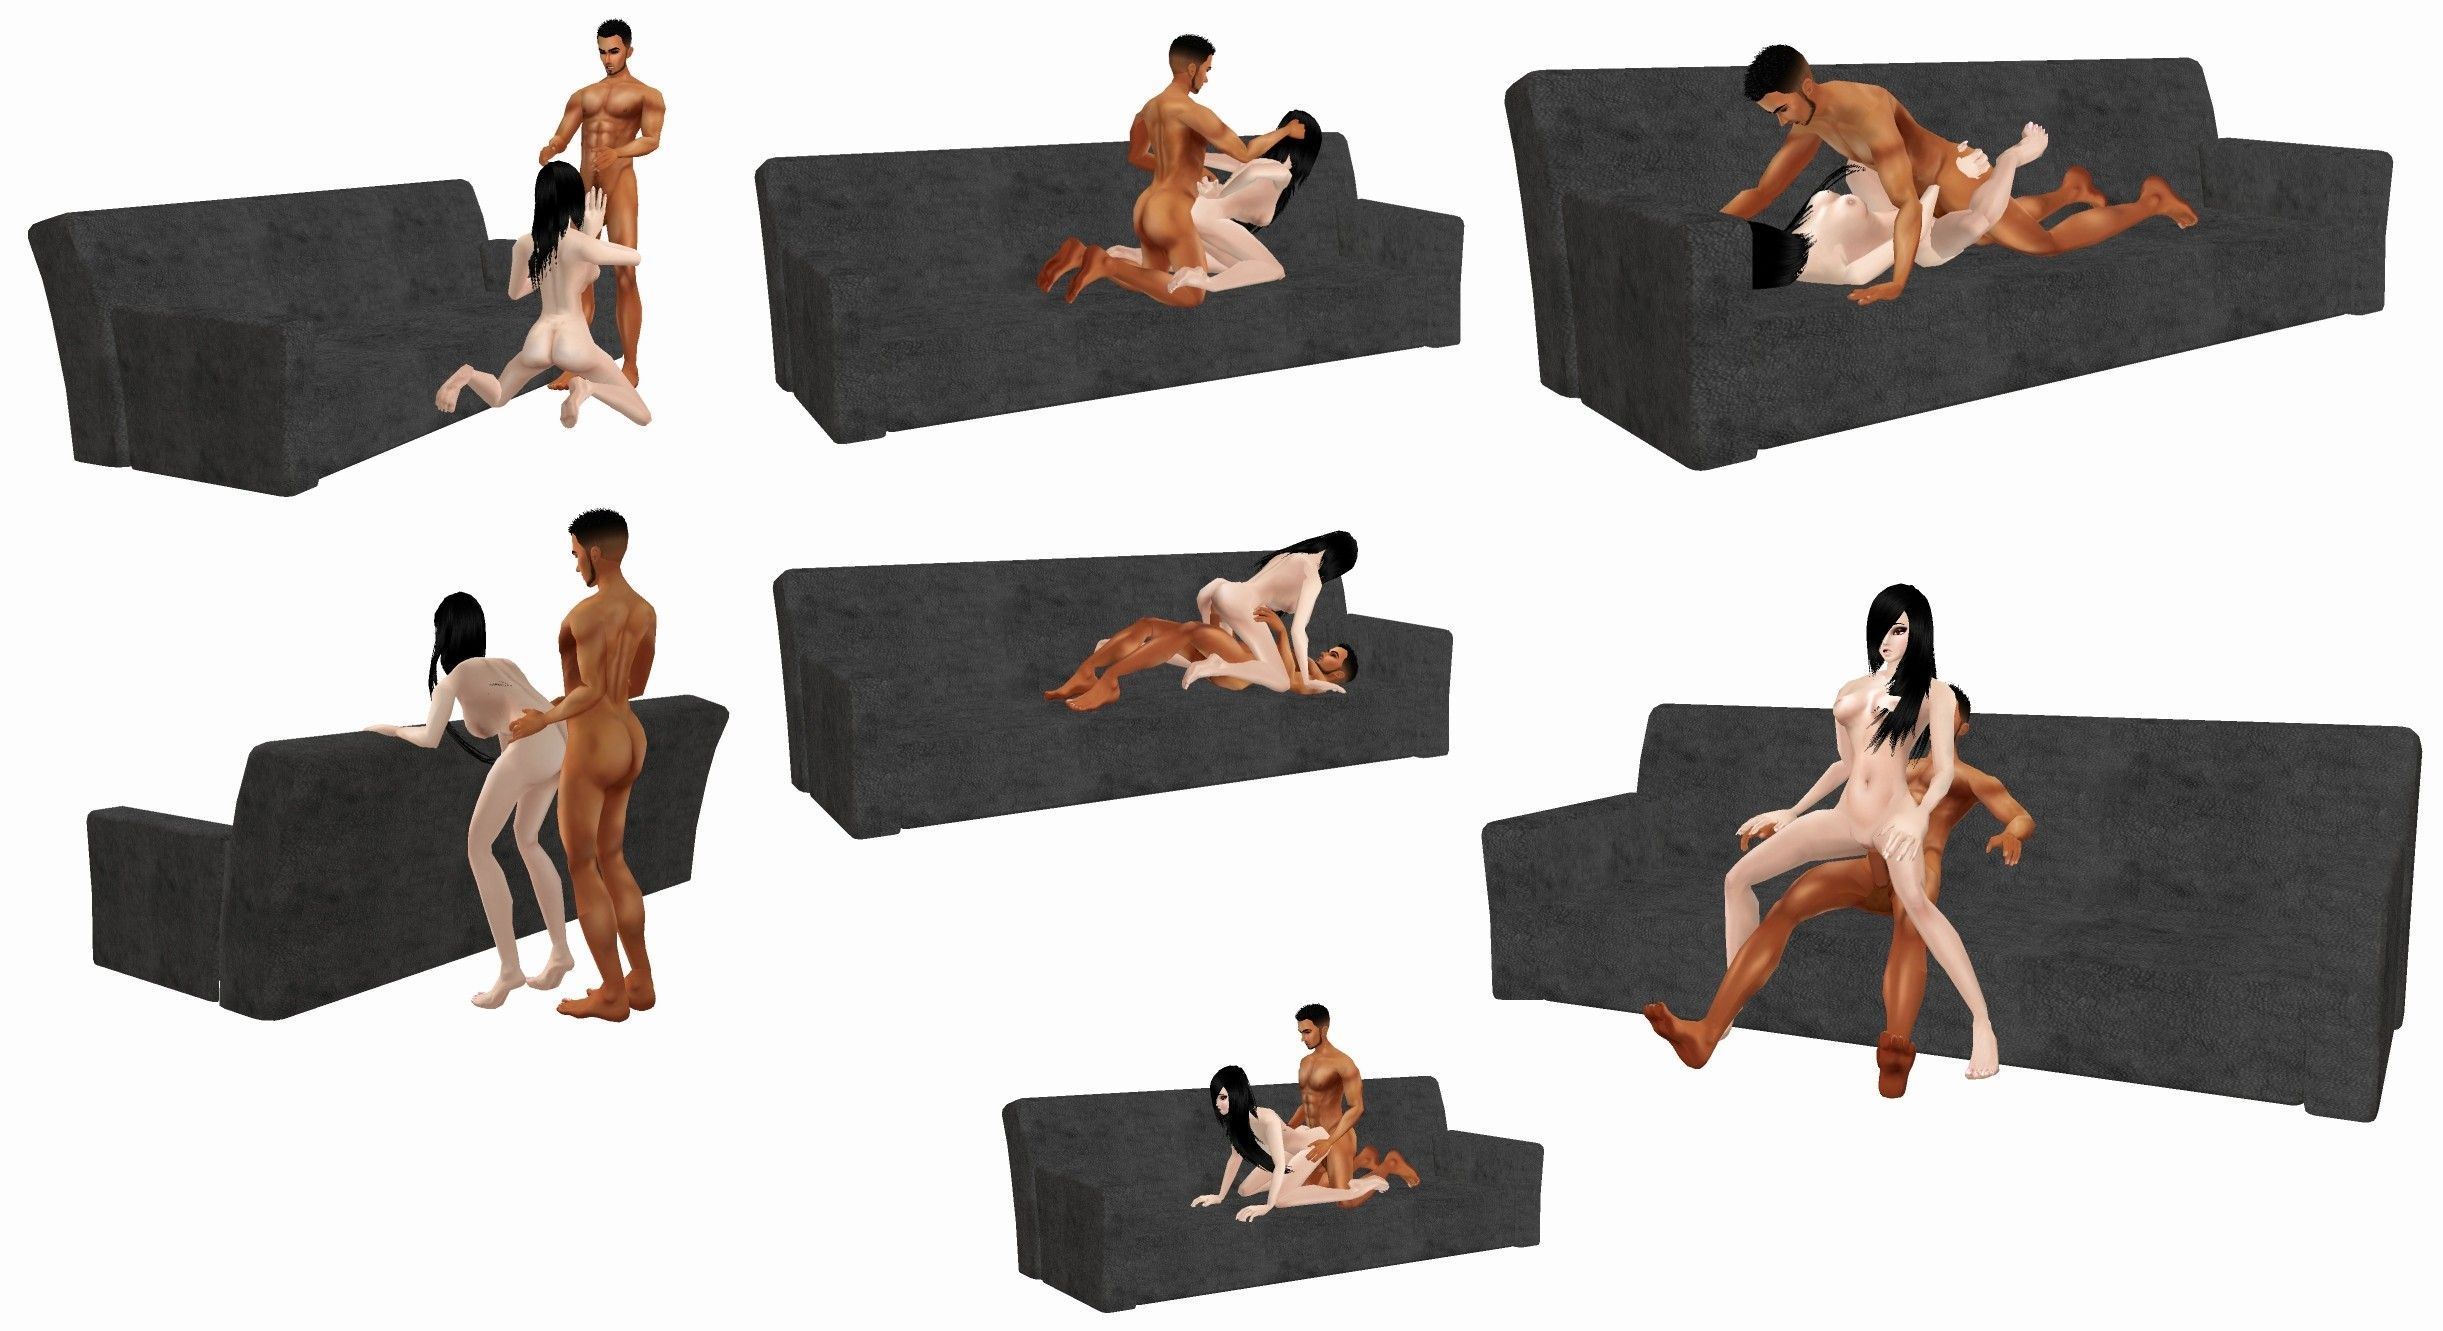 Different Sex Positions On The Couch